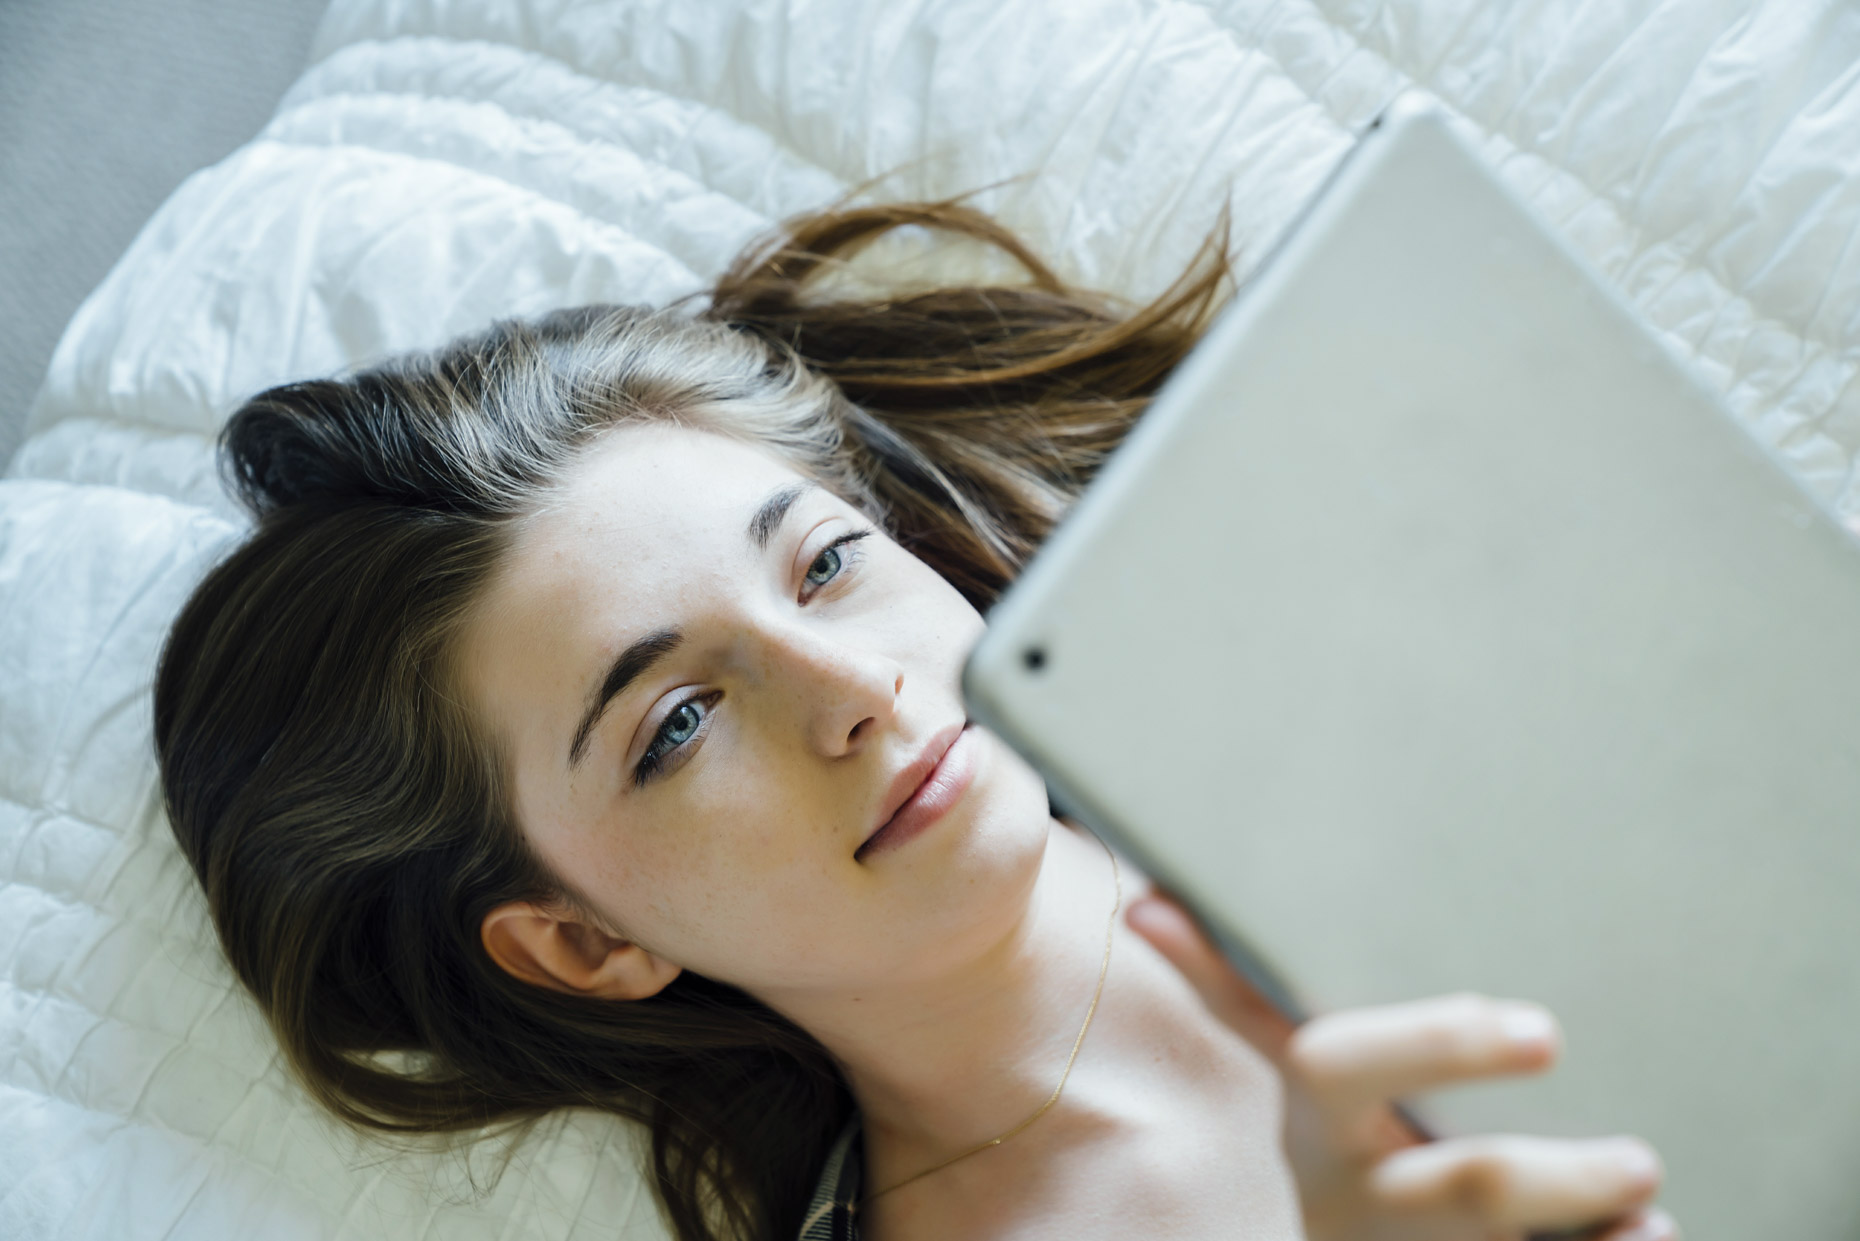 Teen girl with blue eyes laying on bed looking at ipad tablet computer